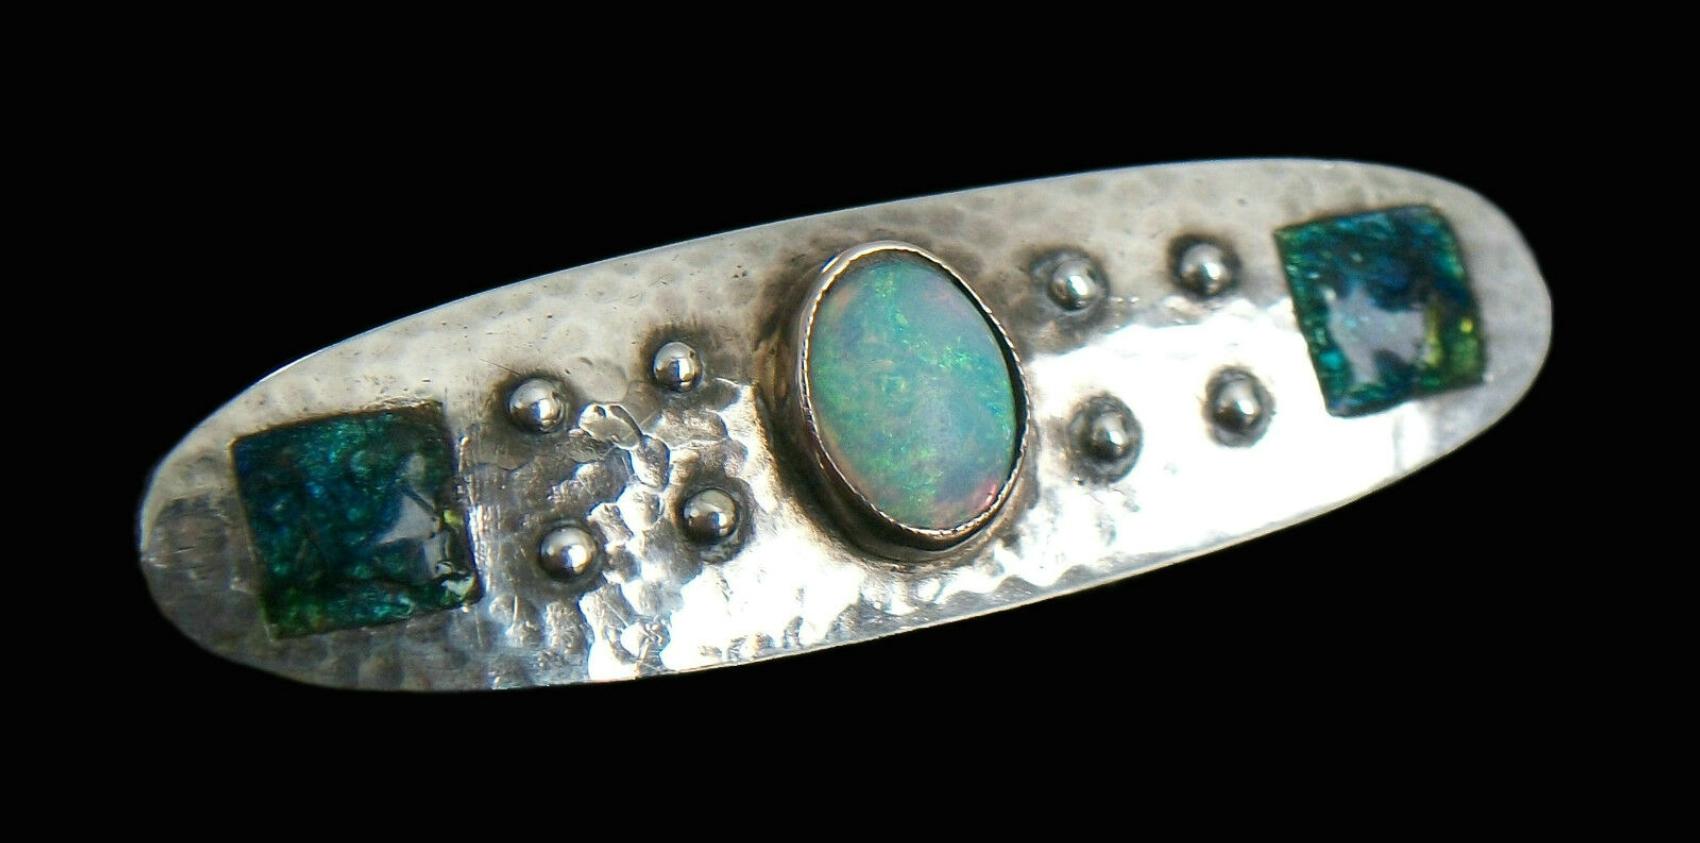 MURRLE BENNETT & CO. - Rare Arts & Crafts fine silver brooch - hand hammered finish with rivet details - central oval cabochon opal bezel set in pink gold - blue and green enamel panels to each end - handmade 'C' clasp - hallmarked and signed 'MBCo'